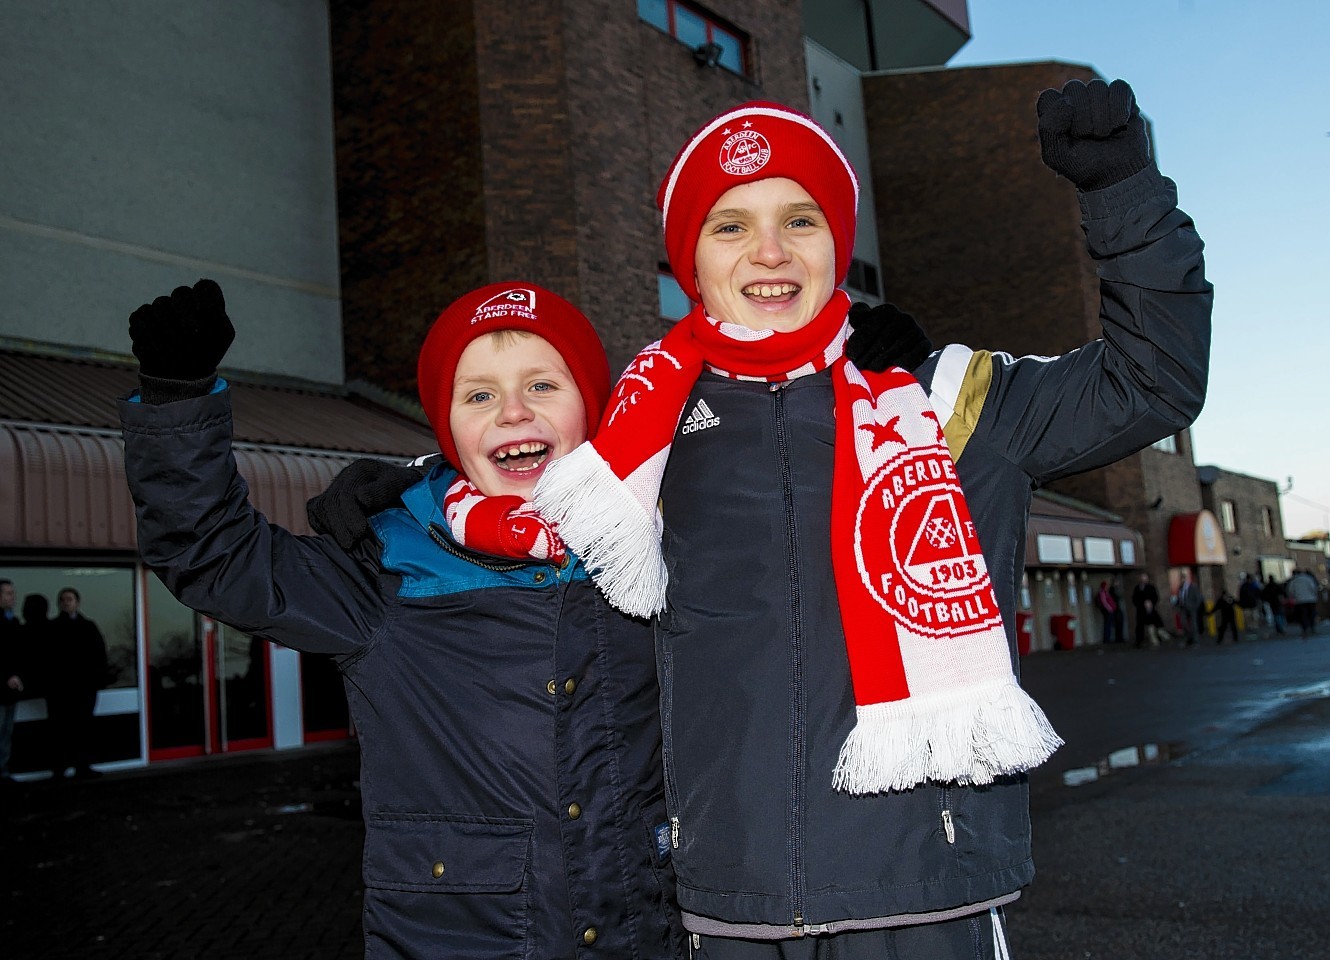 Dons fans have bought over 15,000 tickets